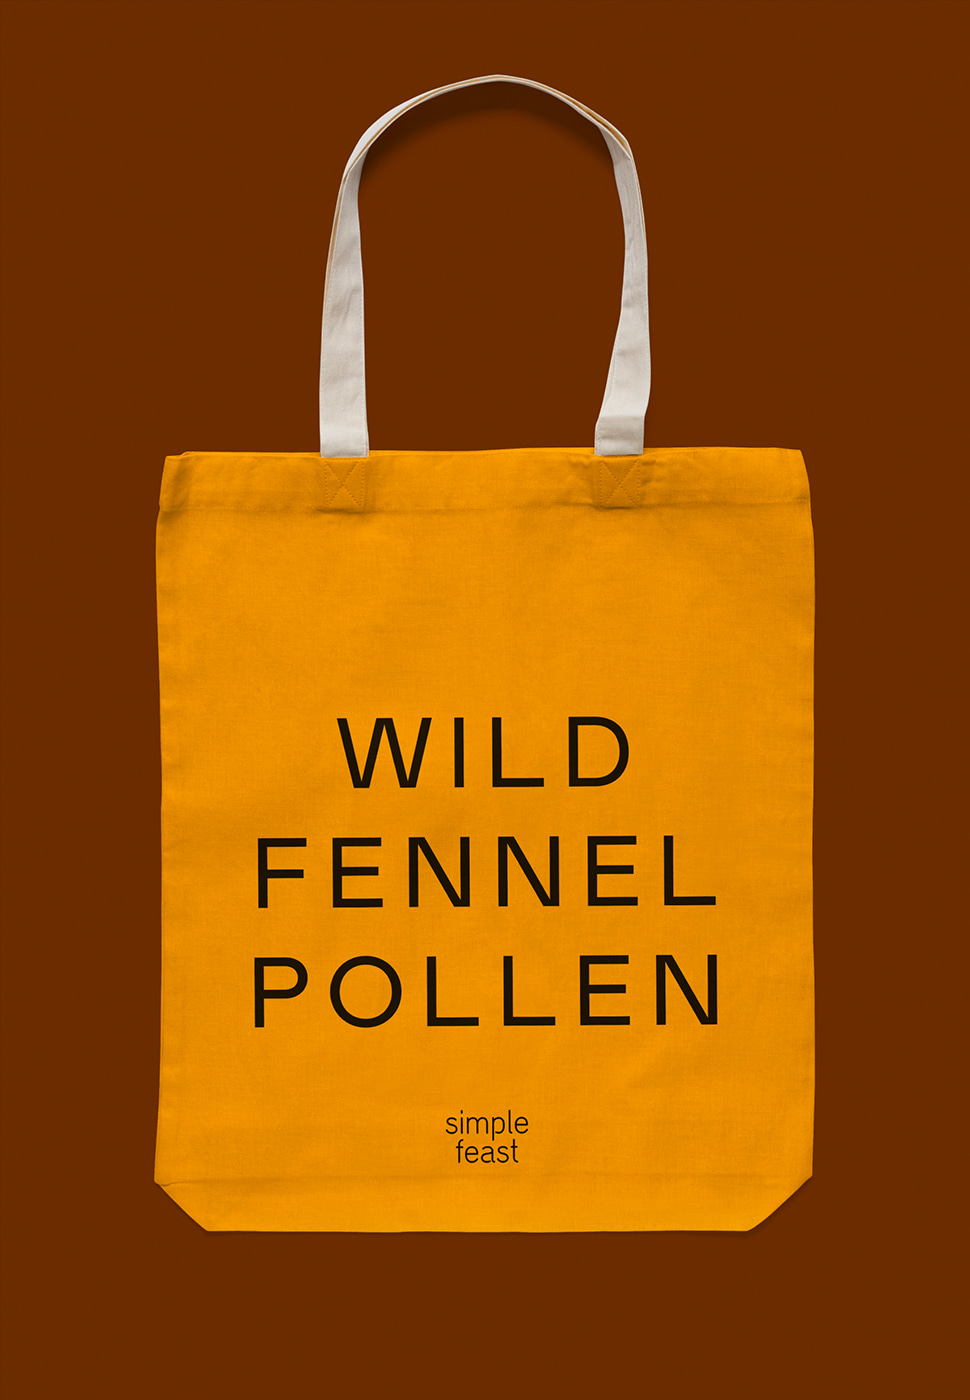 andreas weiland simple feast tote bag